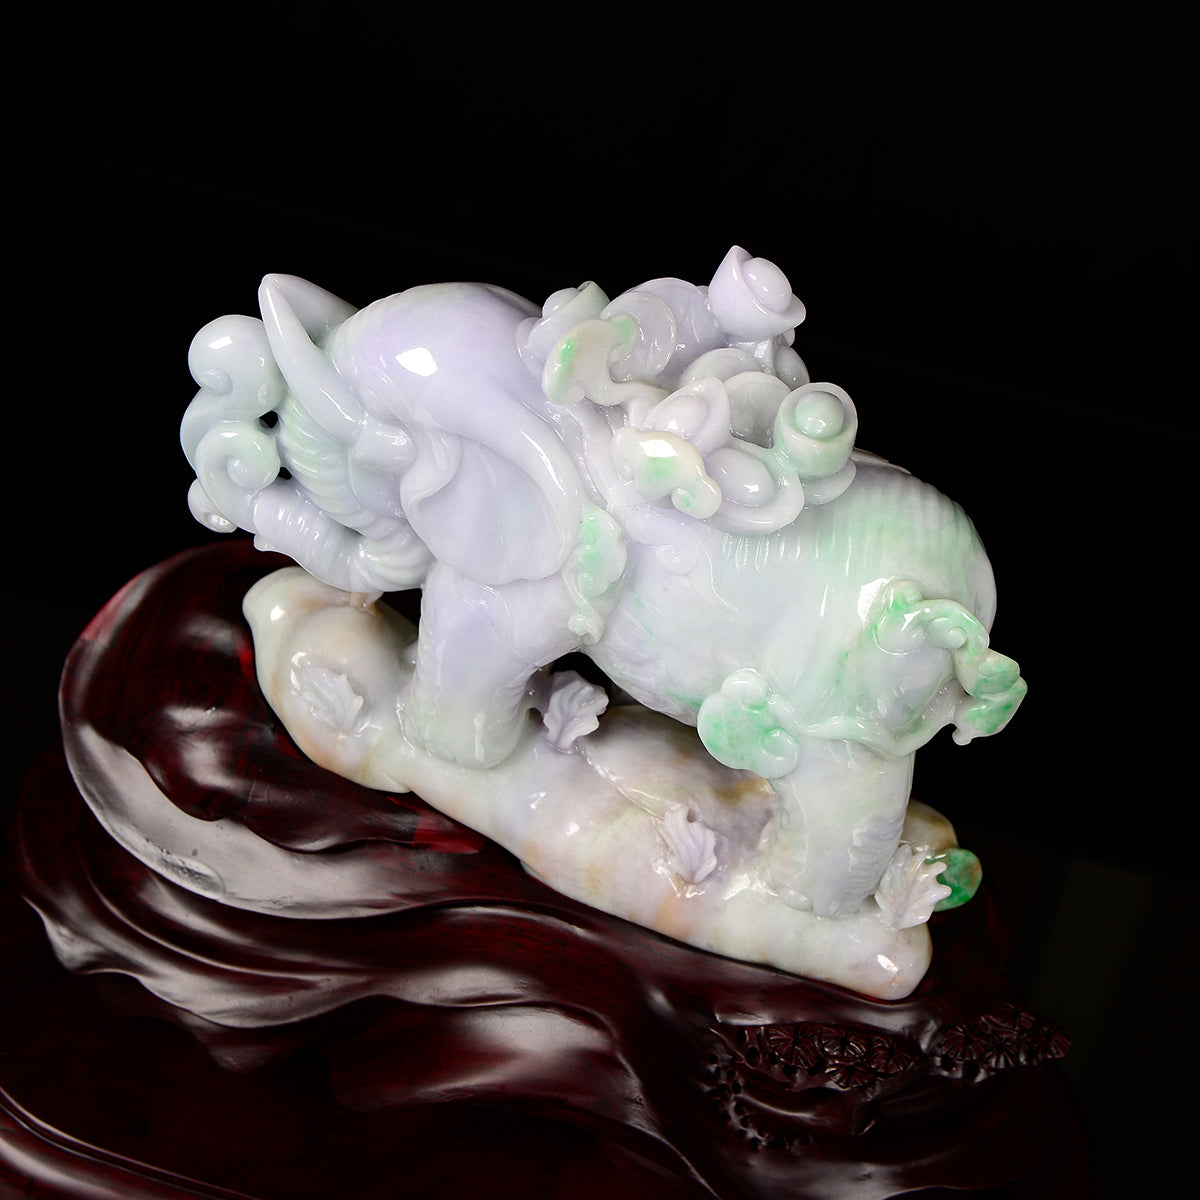 "Majestic Serenity" Type A bicolour green and lavender elephant Jadeite sculpture.